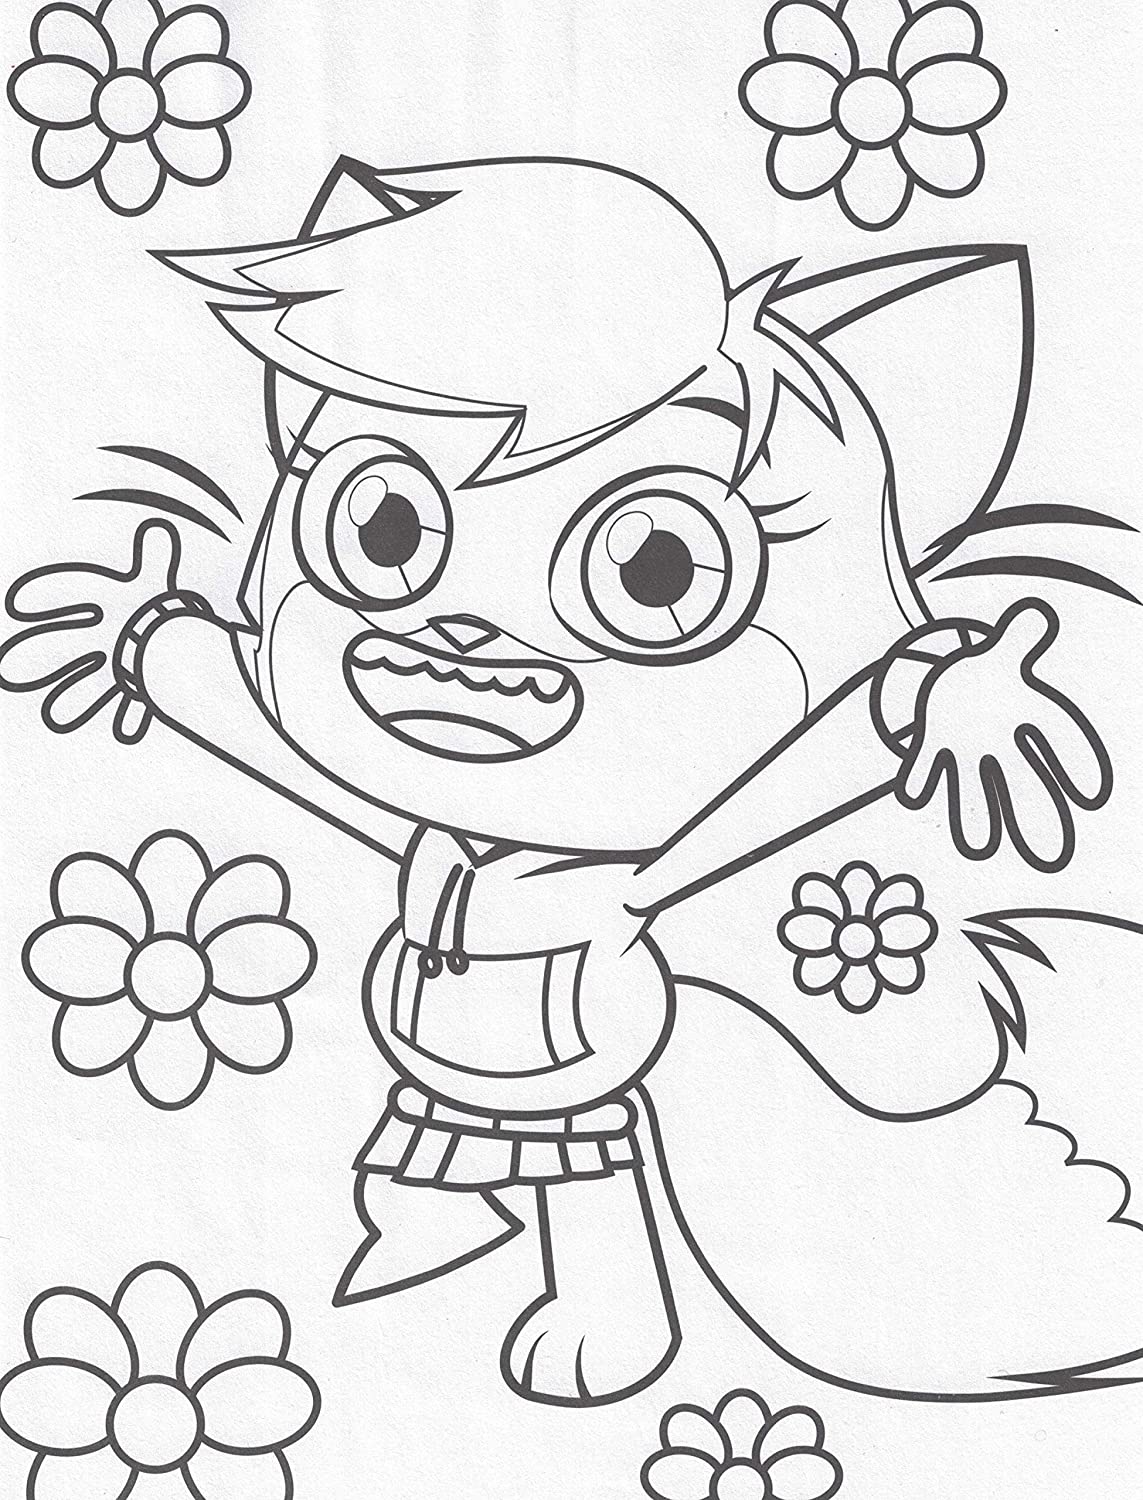 670 Collections Ryan Cartoon Coloring Pages  Latest Free